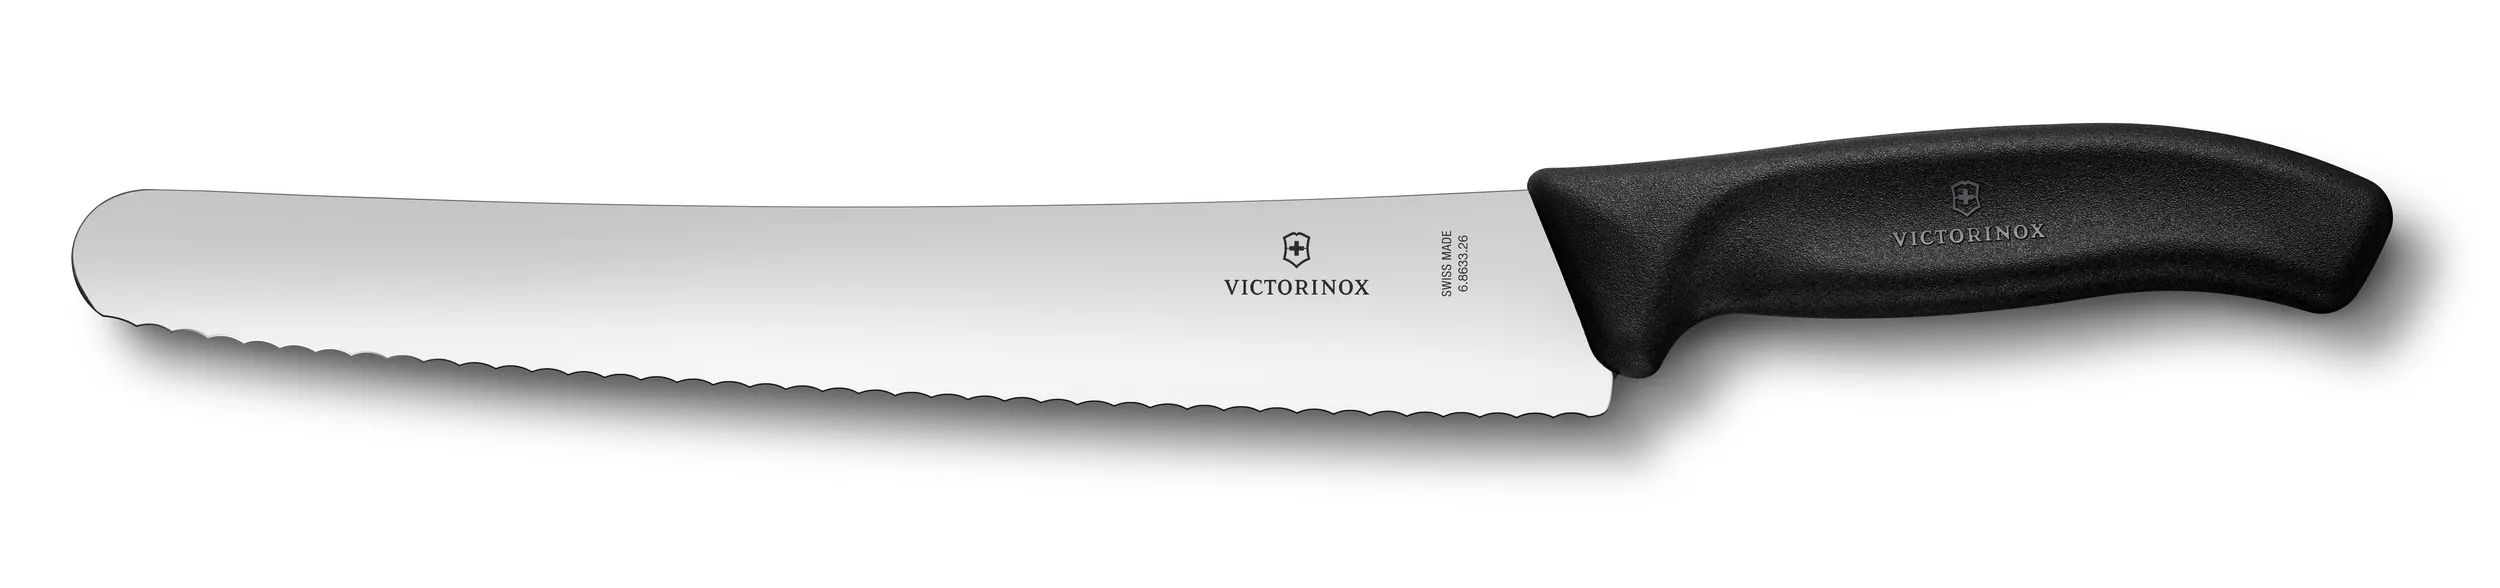 Swiss Classic Pastry Knife-6.8633.26G